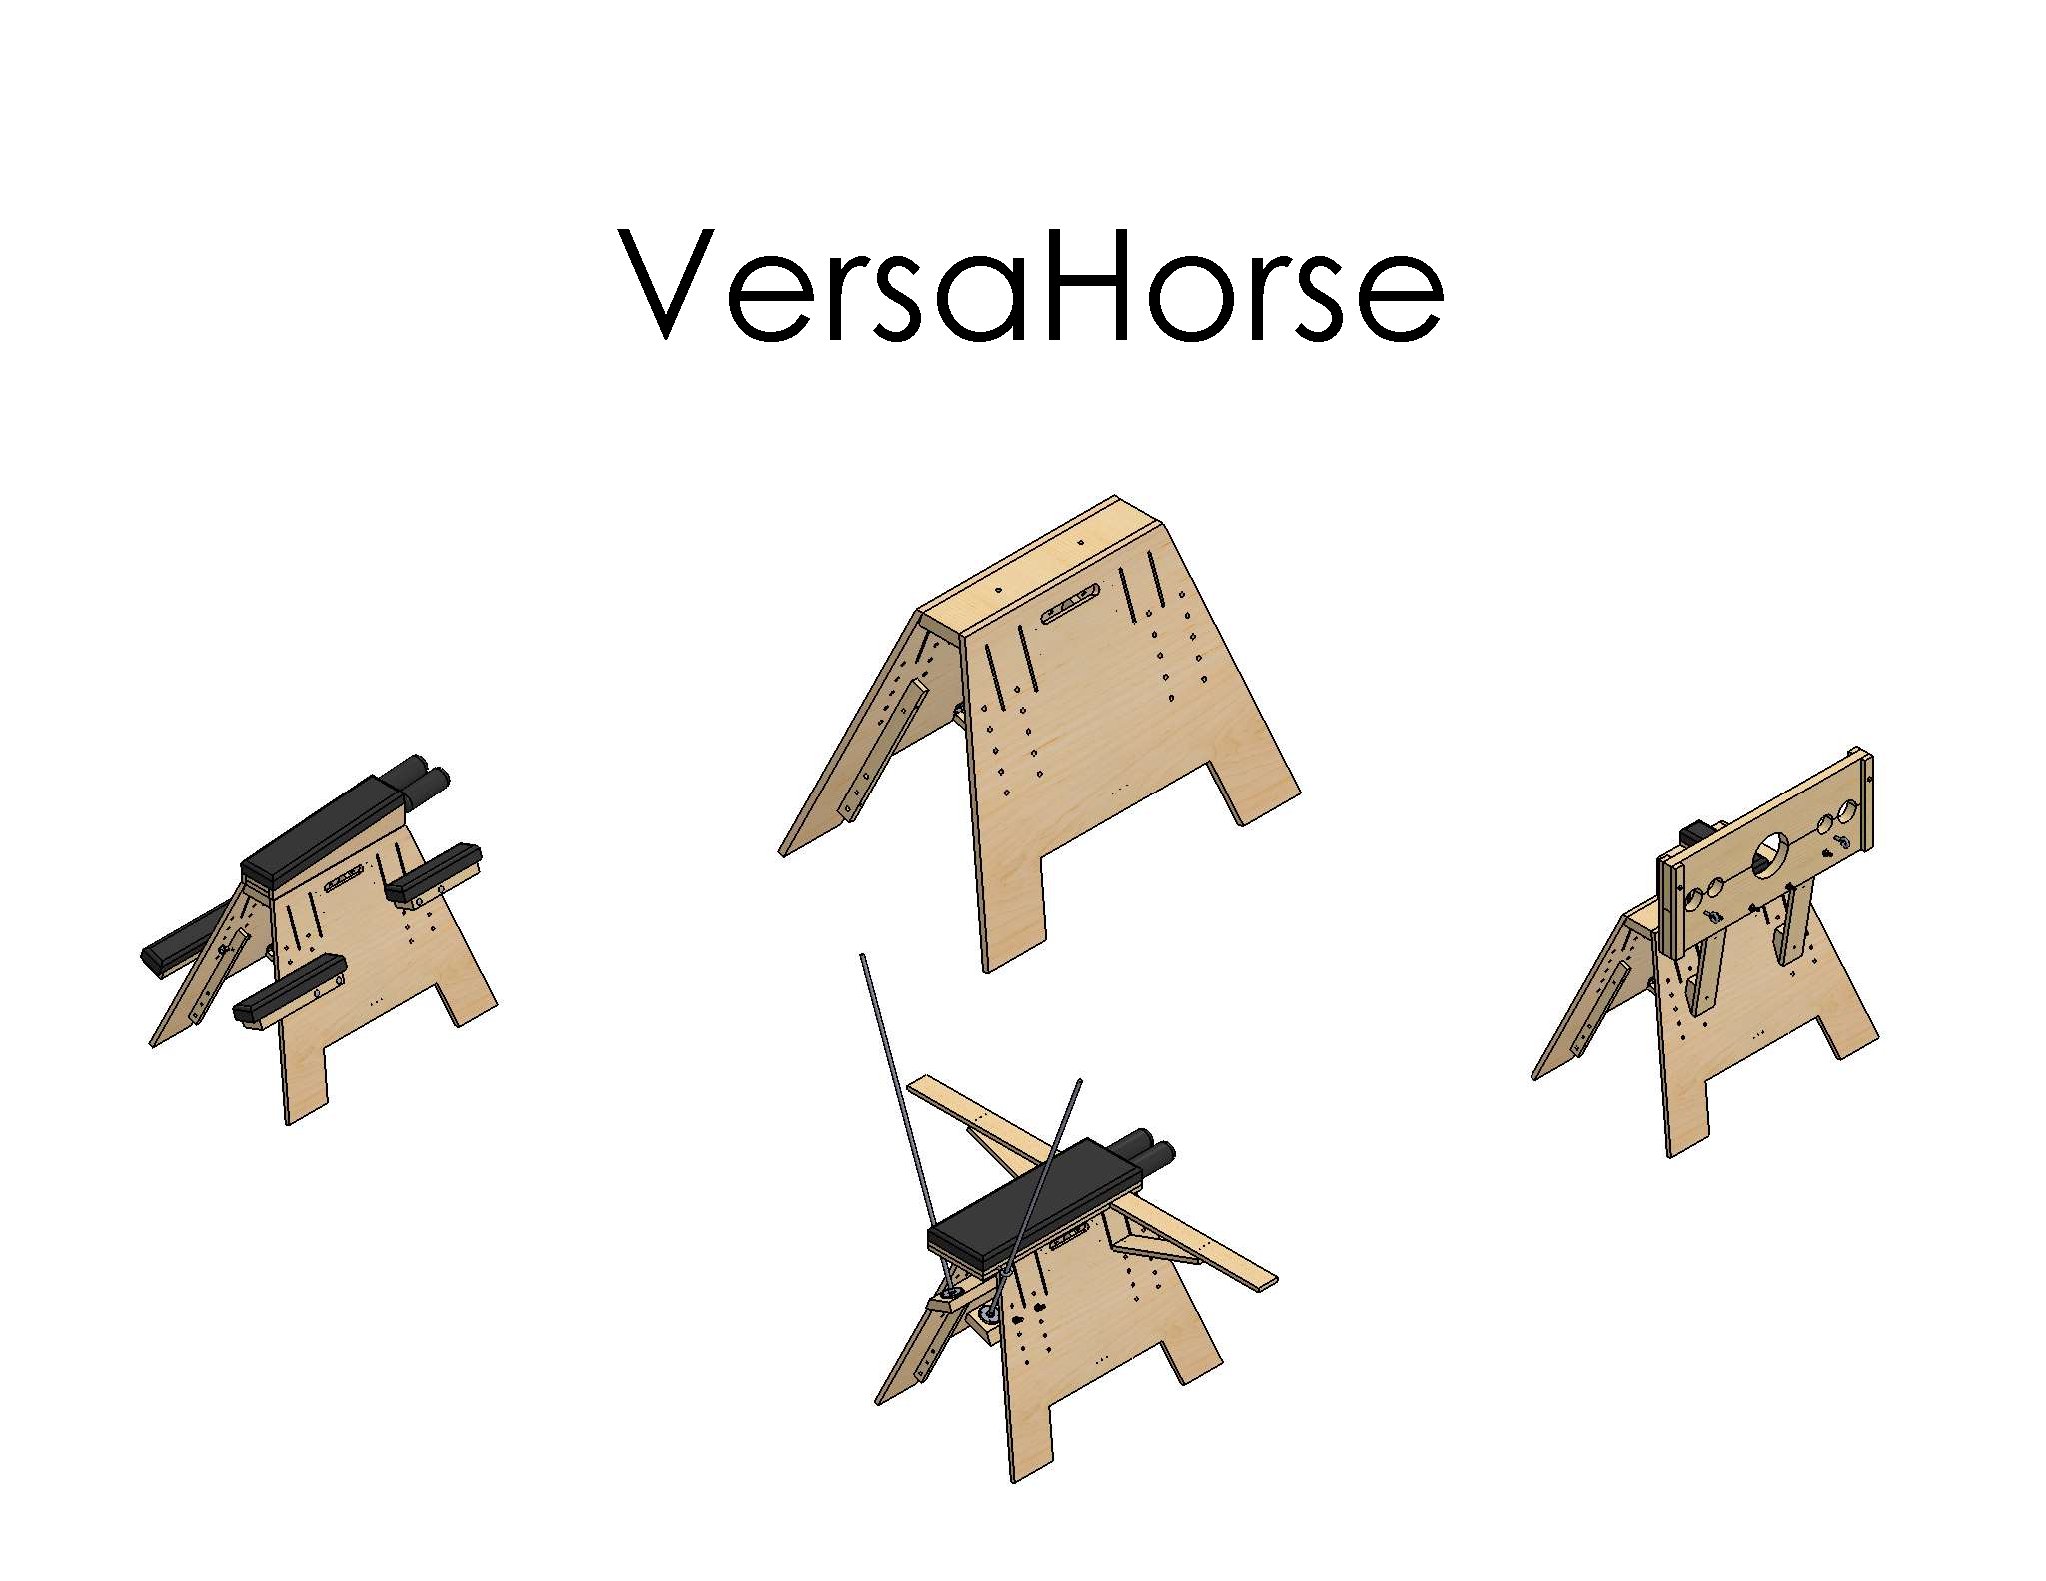 The VersaHorse plans are not very easy to follow, so I redrew them all in CAD to (hopefully) make it easier for folks to understand and build.